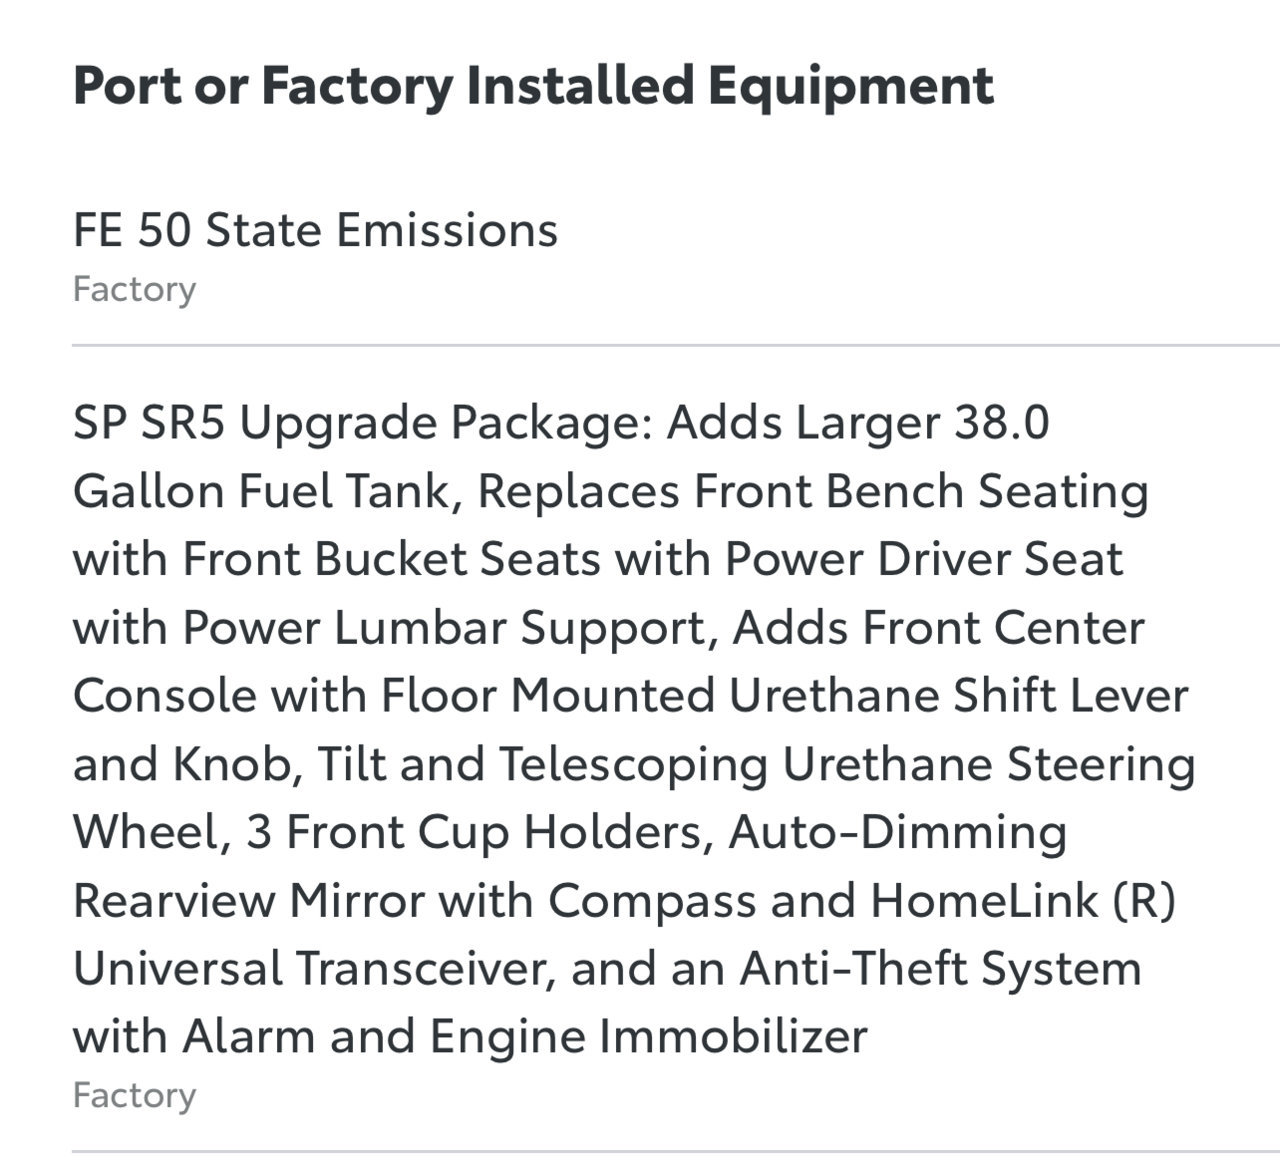 TSS Off Road package equipment | Toyota Tundra Forum